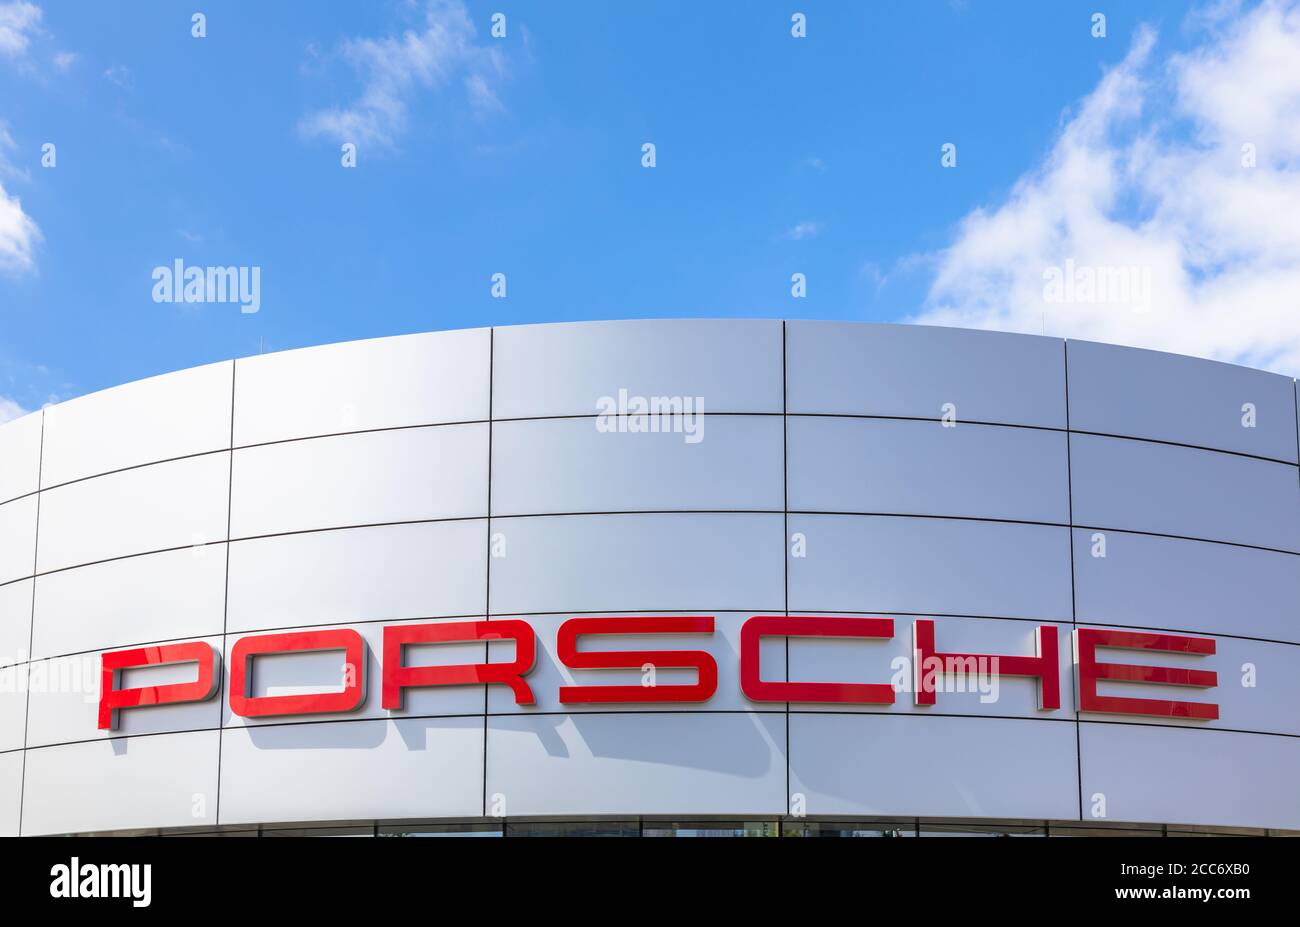 Berlin, Germany - June 12, 2018 - Brand name of Porsche Center in Berlin Adlershof, a new showroom and store for Porsche cars opened in 2017. Stock Photo